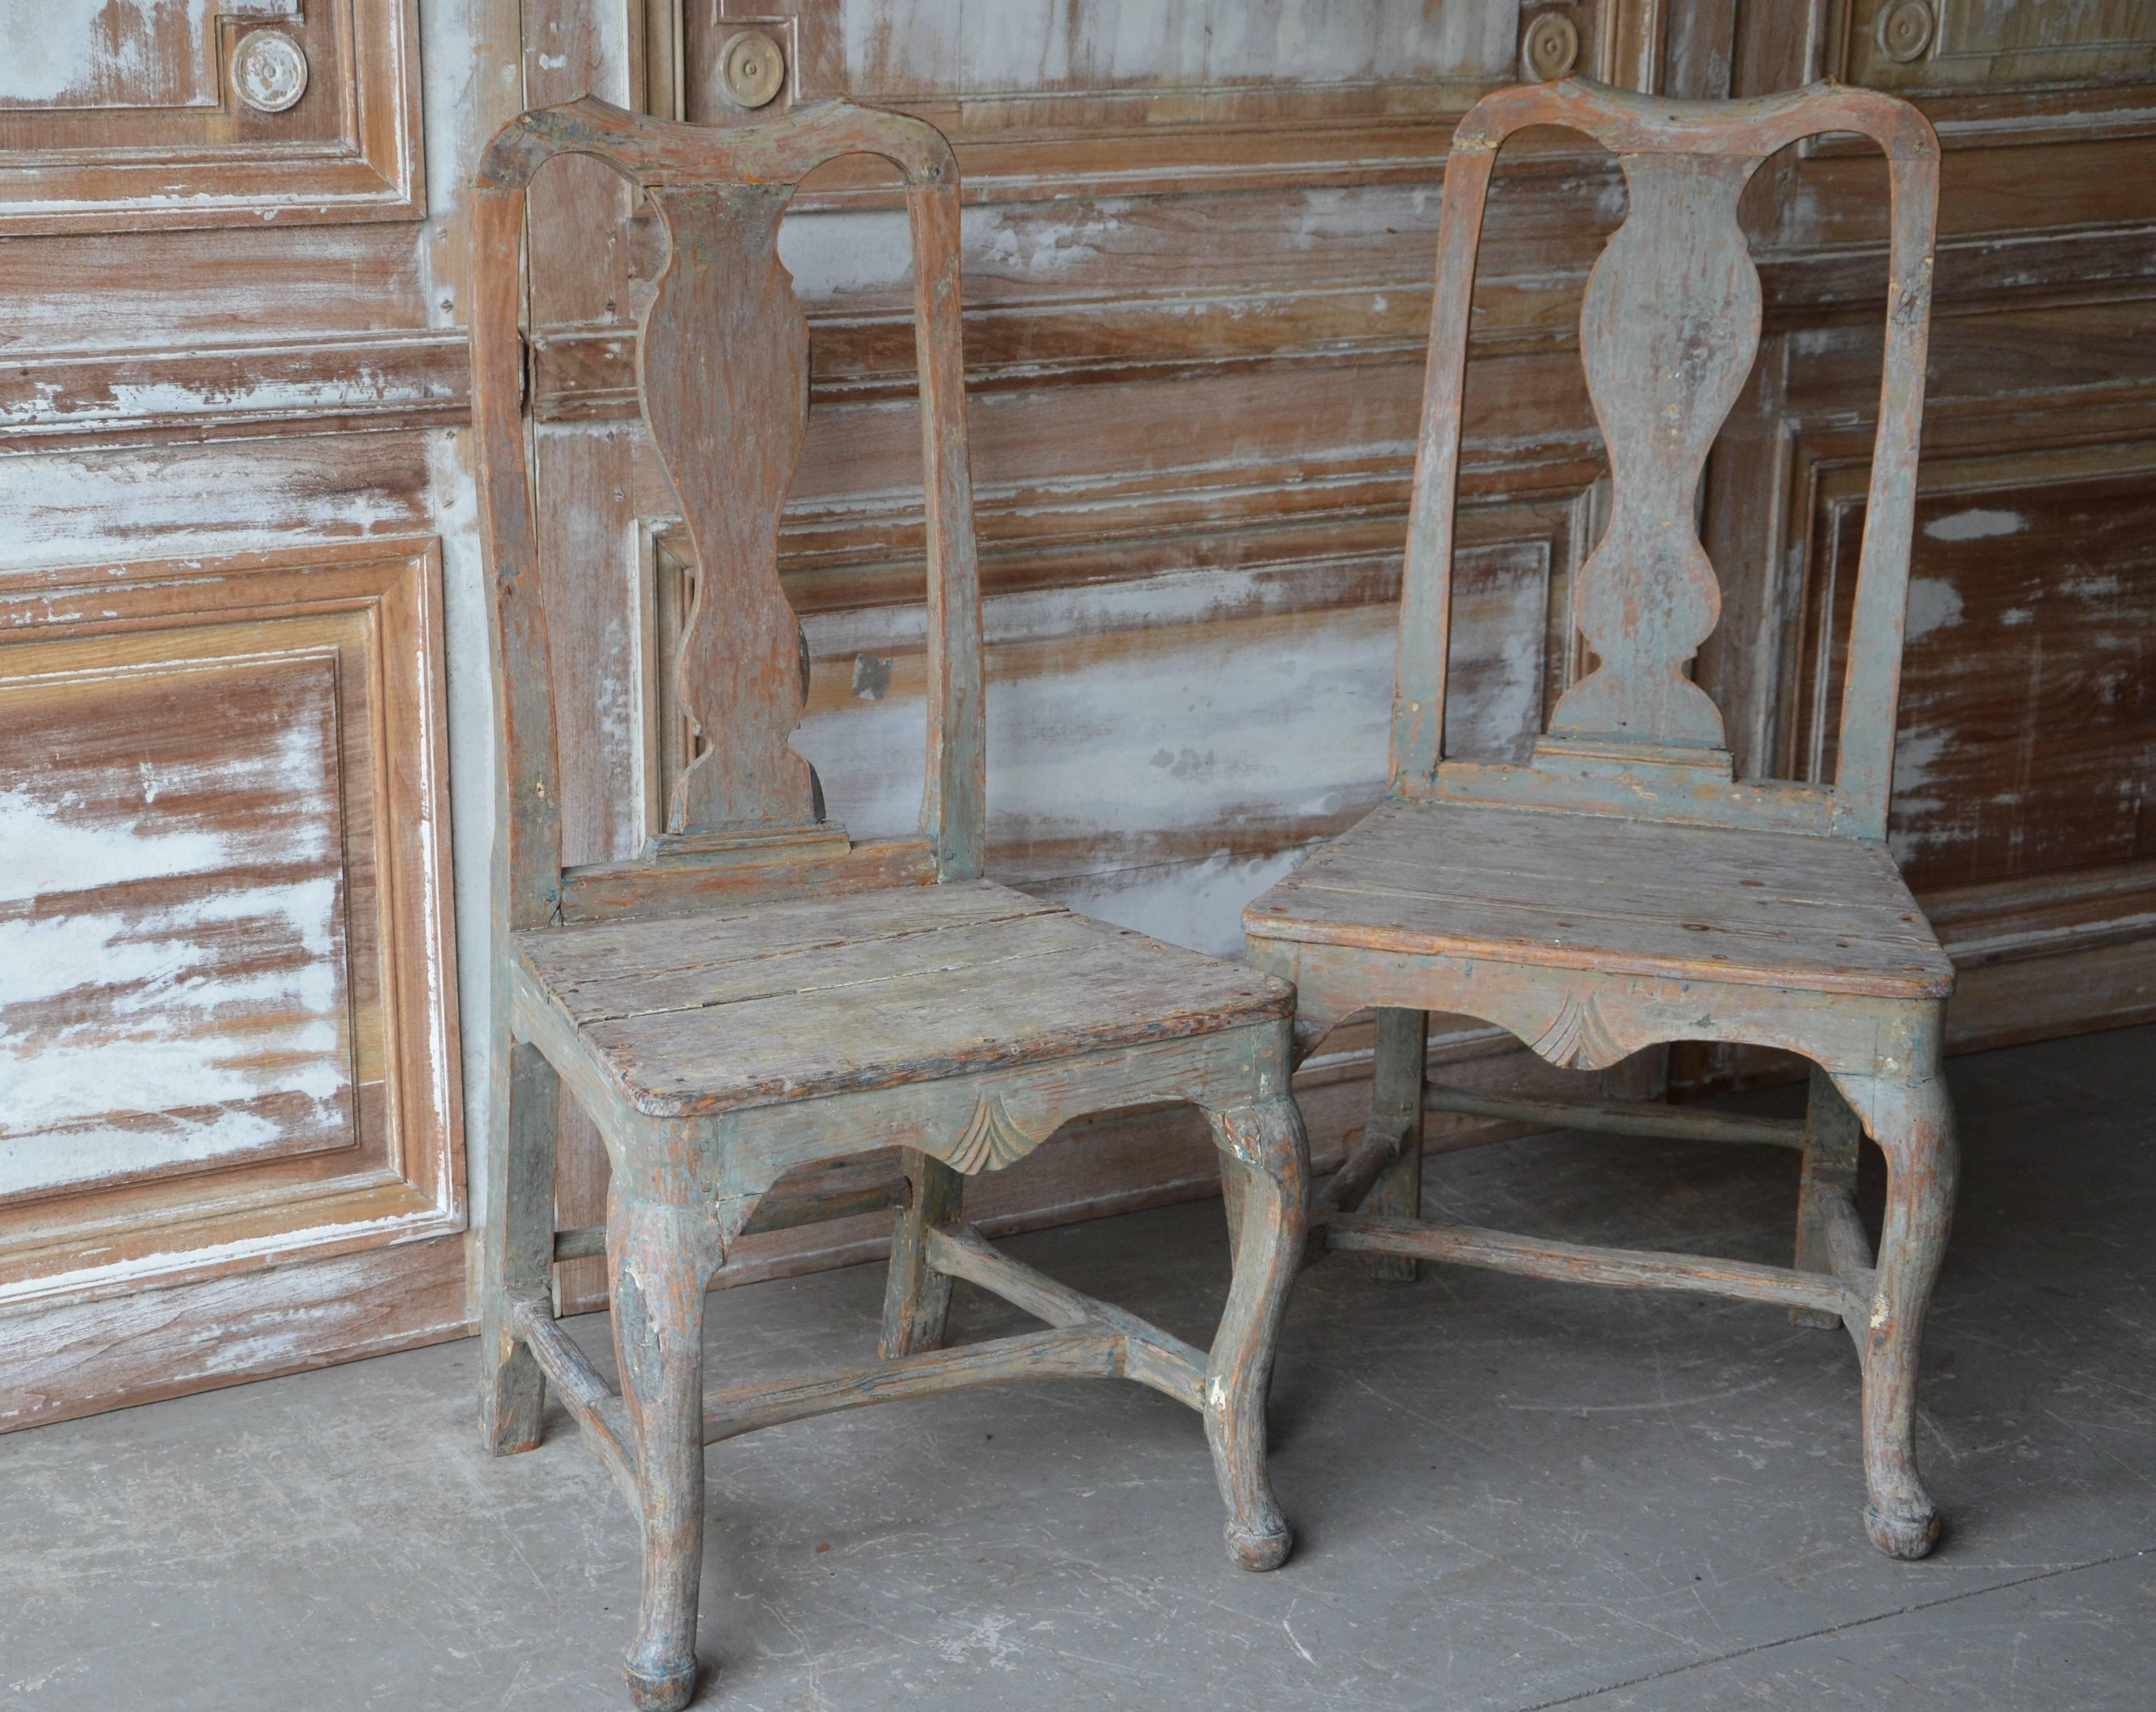 A pair of beautiful 18th century period Rococo chairs in original paint.
Gotland, Sweden, circa 1760.

Here are few examples … surprising pieces and objects, authentic, decorative and rare items that you will only see in our gallery.

Seat